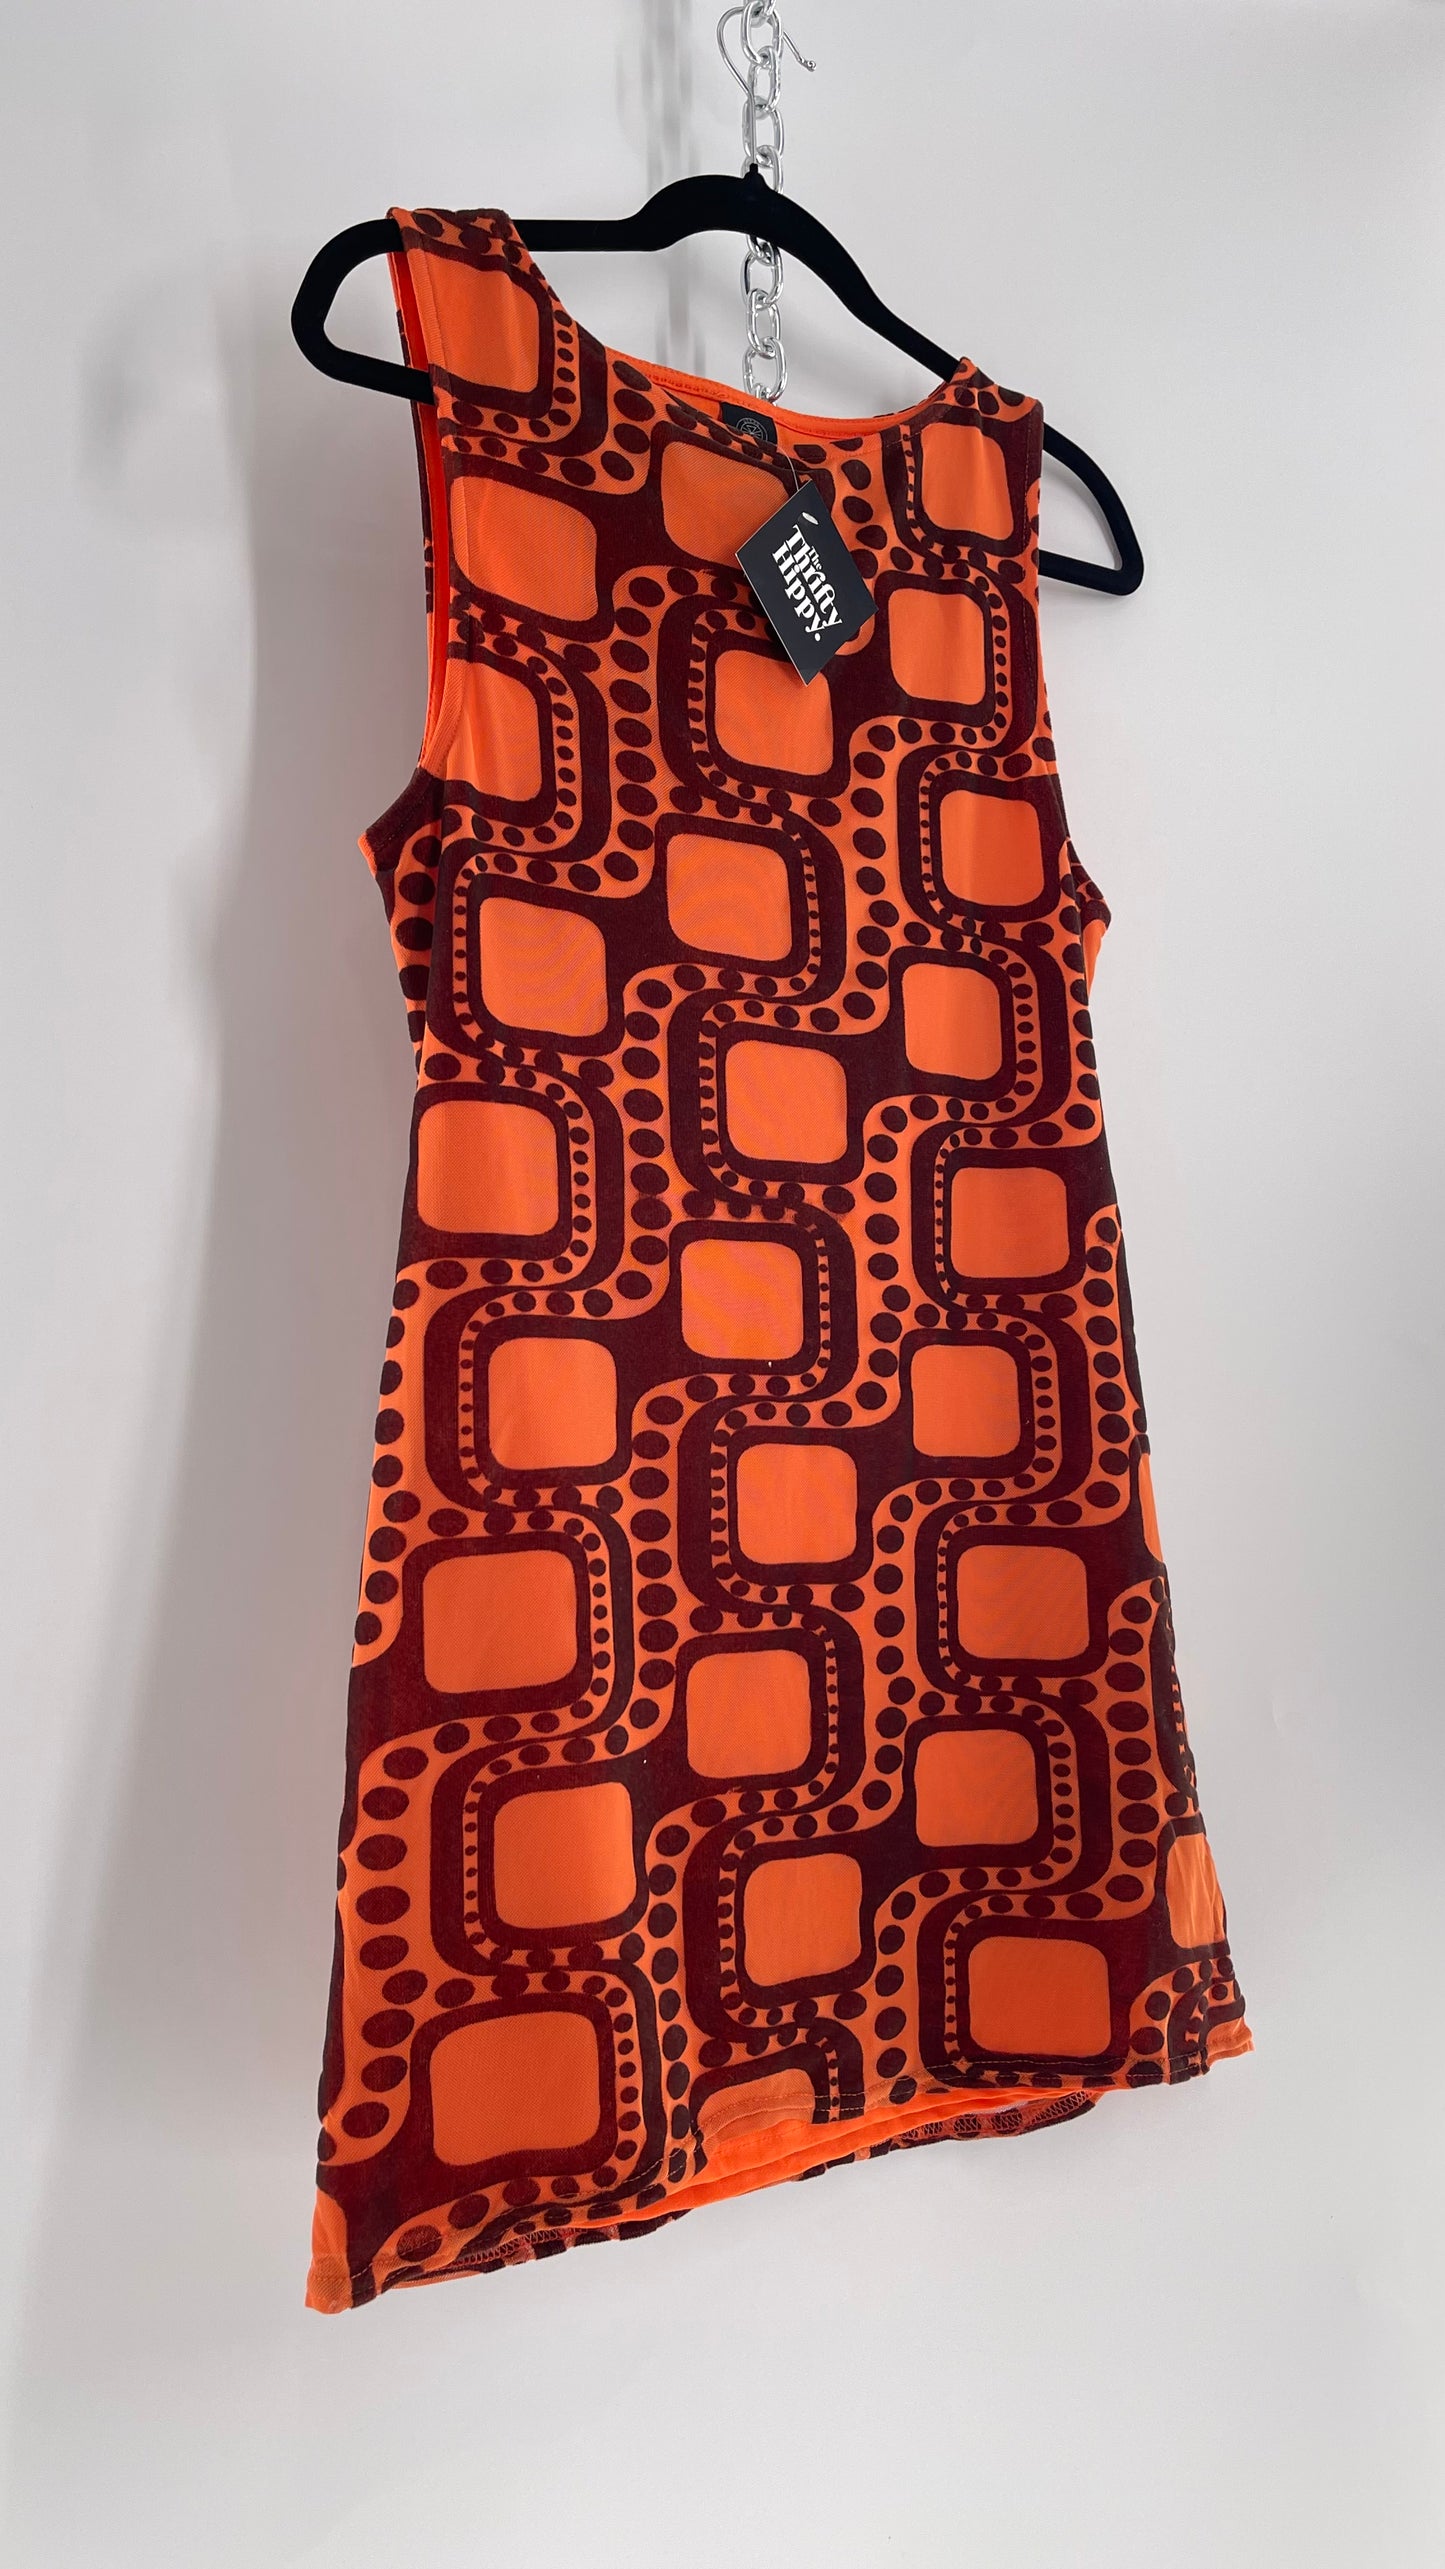 Urban Outfitters Orange Retro Patterned Tunic Dress with Brown Velvet 1970s Print  (Large)